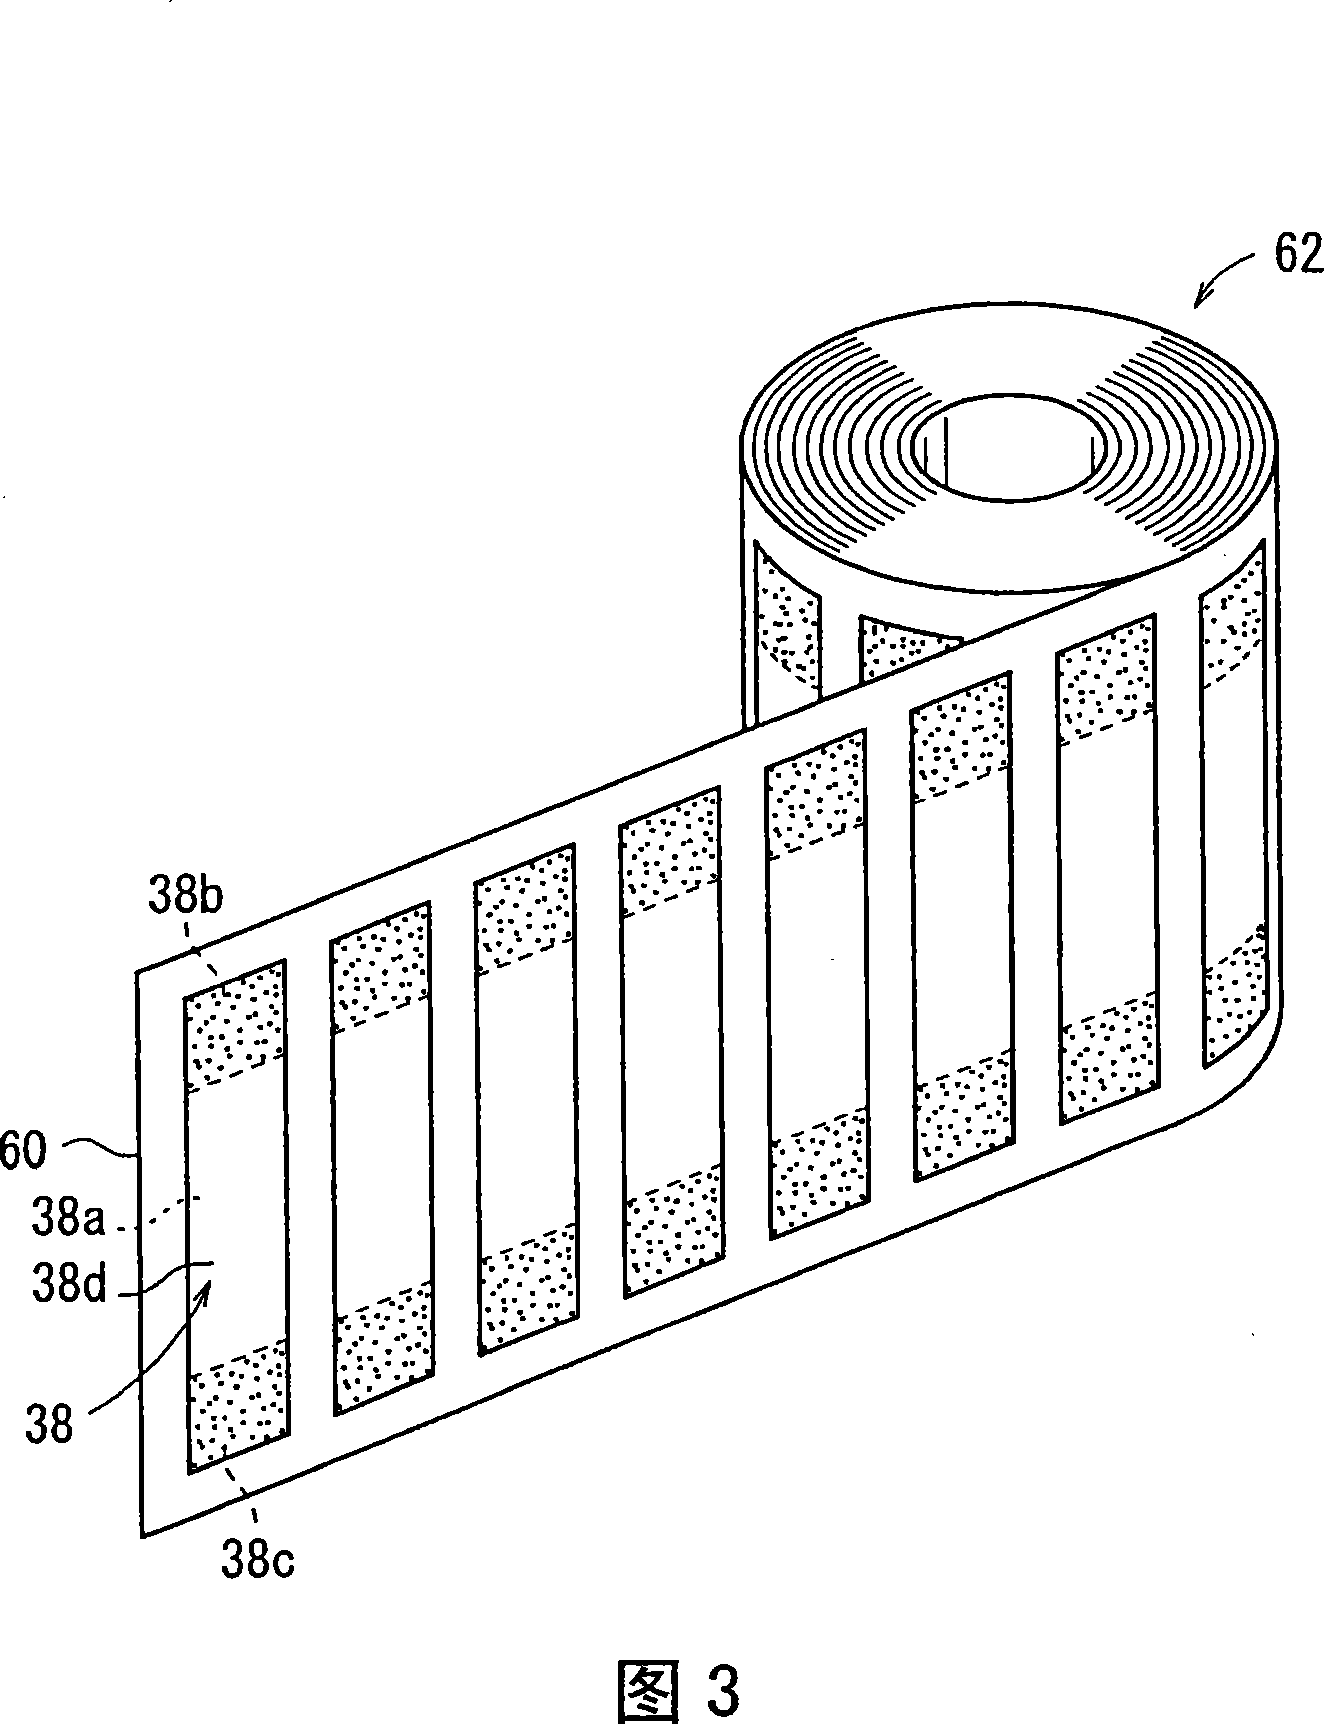 Apparatus and method for pasting adhesive label